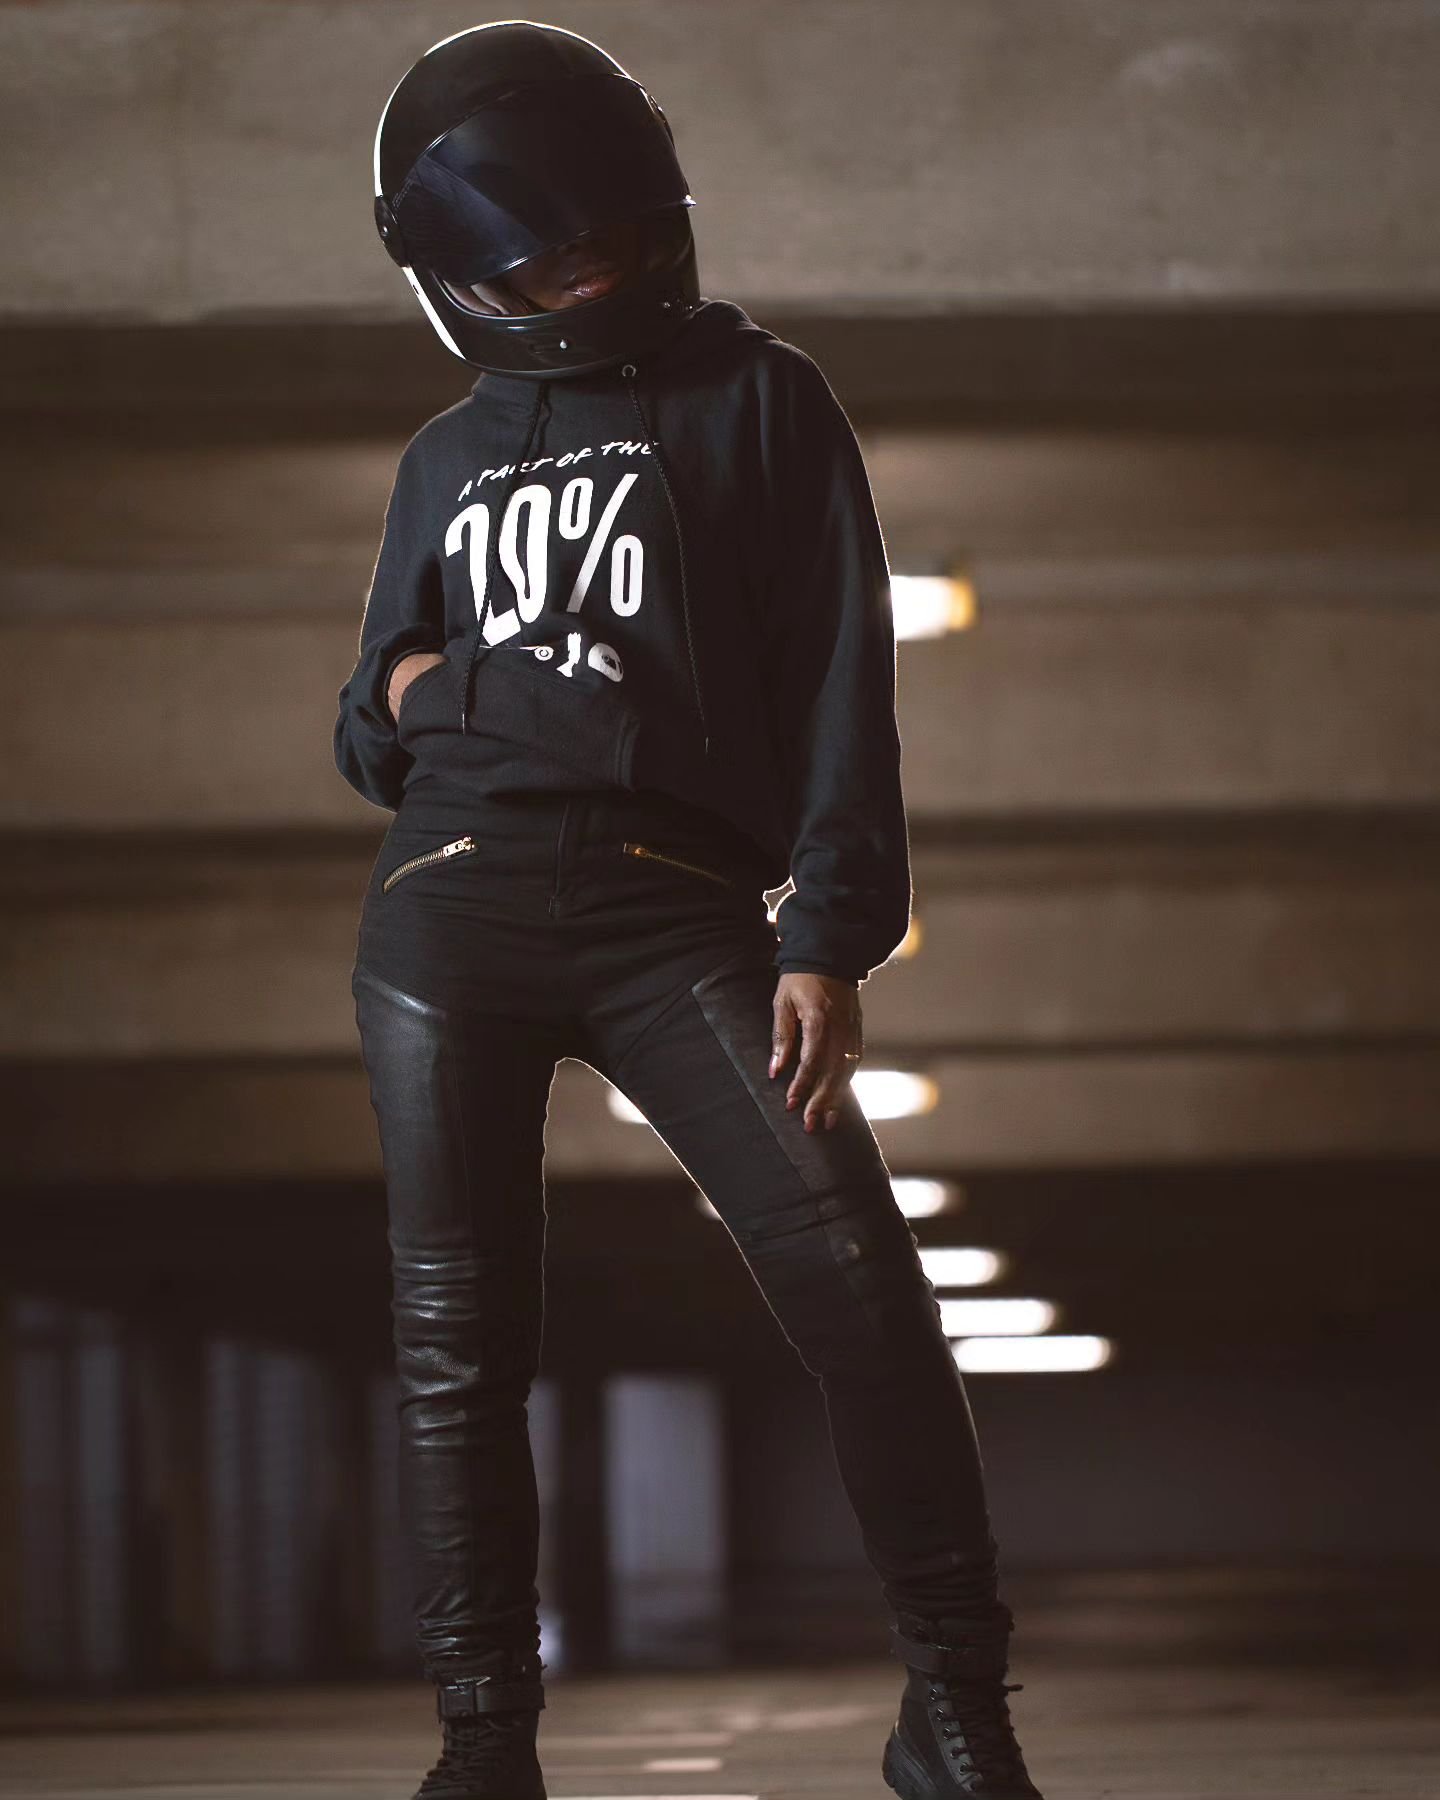 Based on the trajectory we should see women riders increase to 25% by 2030, what do you guys think?! Can we make it happen?! 🏍️⚡💥

We are here for the women riders and passengers. | www.chicriot.com 

#motofashion #motobrand #motoapparel #bikerbabe